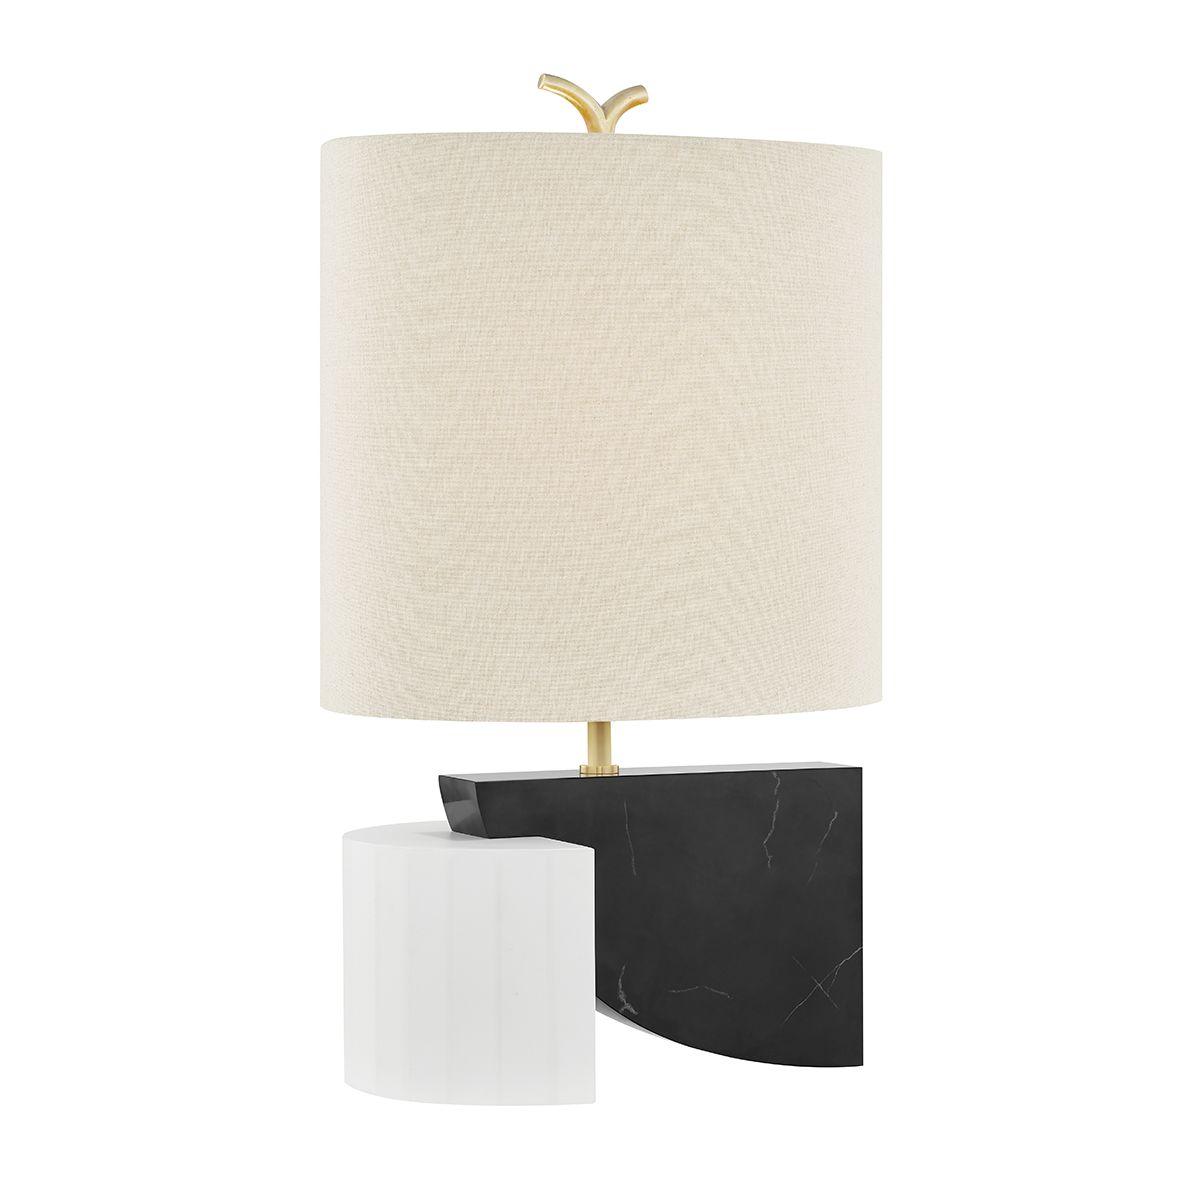 Construct Table Lamp Black and Cream Marble with Aged Brass Accents